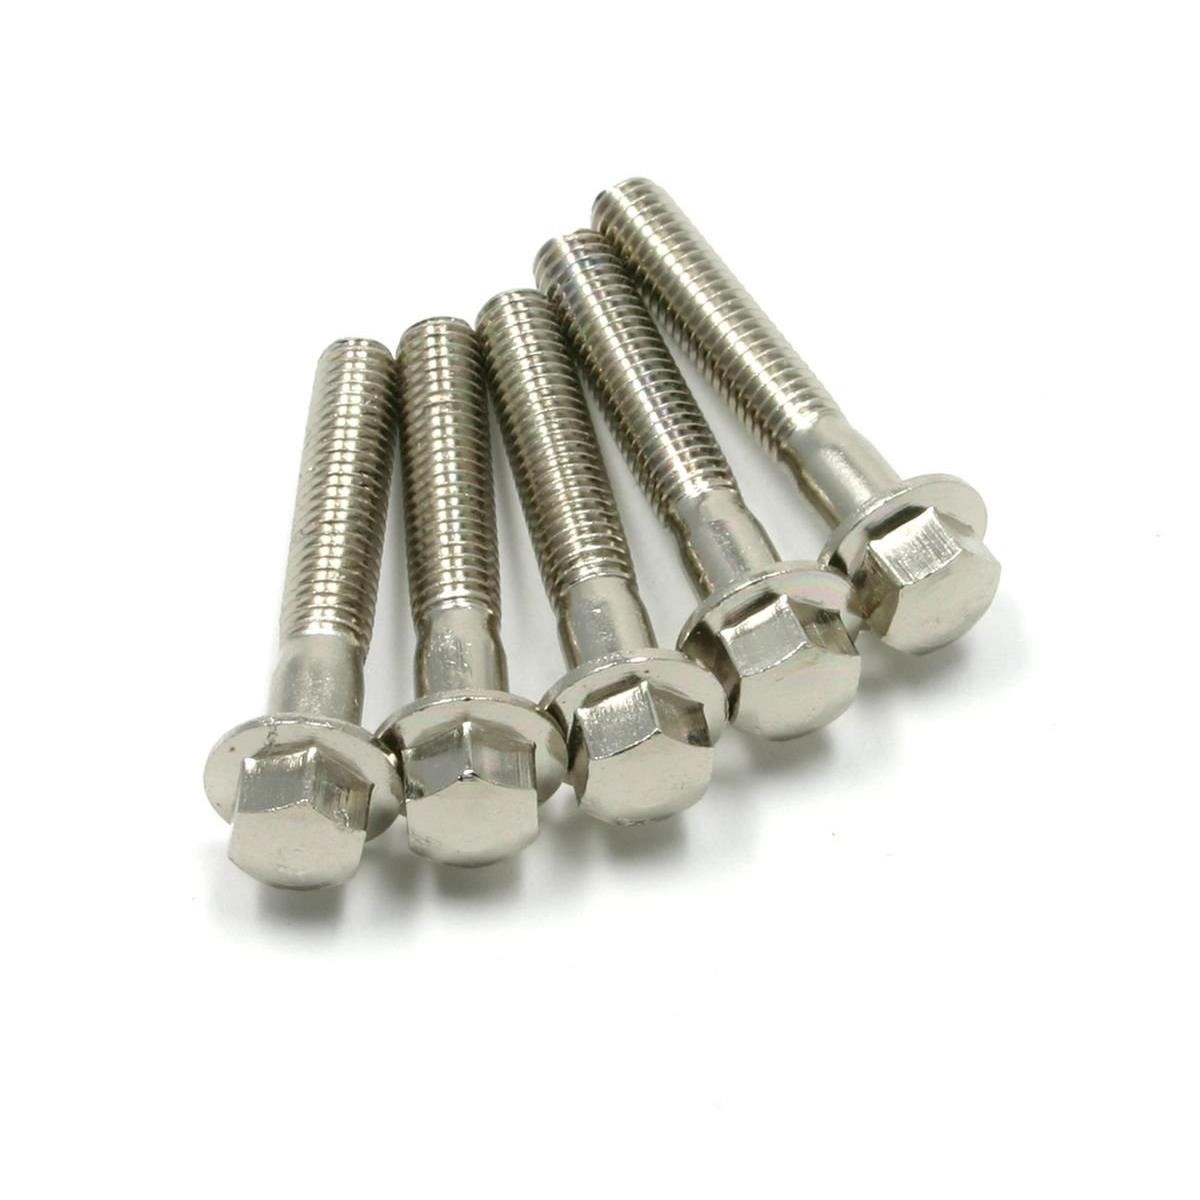 DRC Stainless Steel Bolts  M6 x 30 mm, 5-Pack